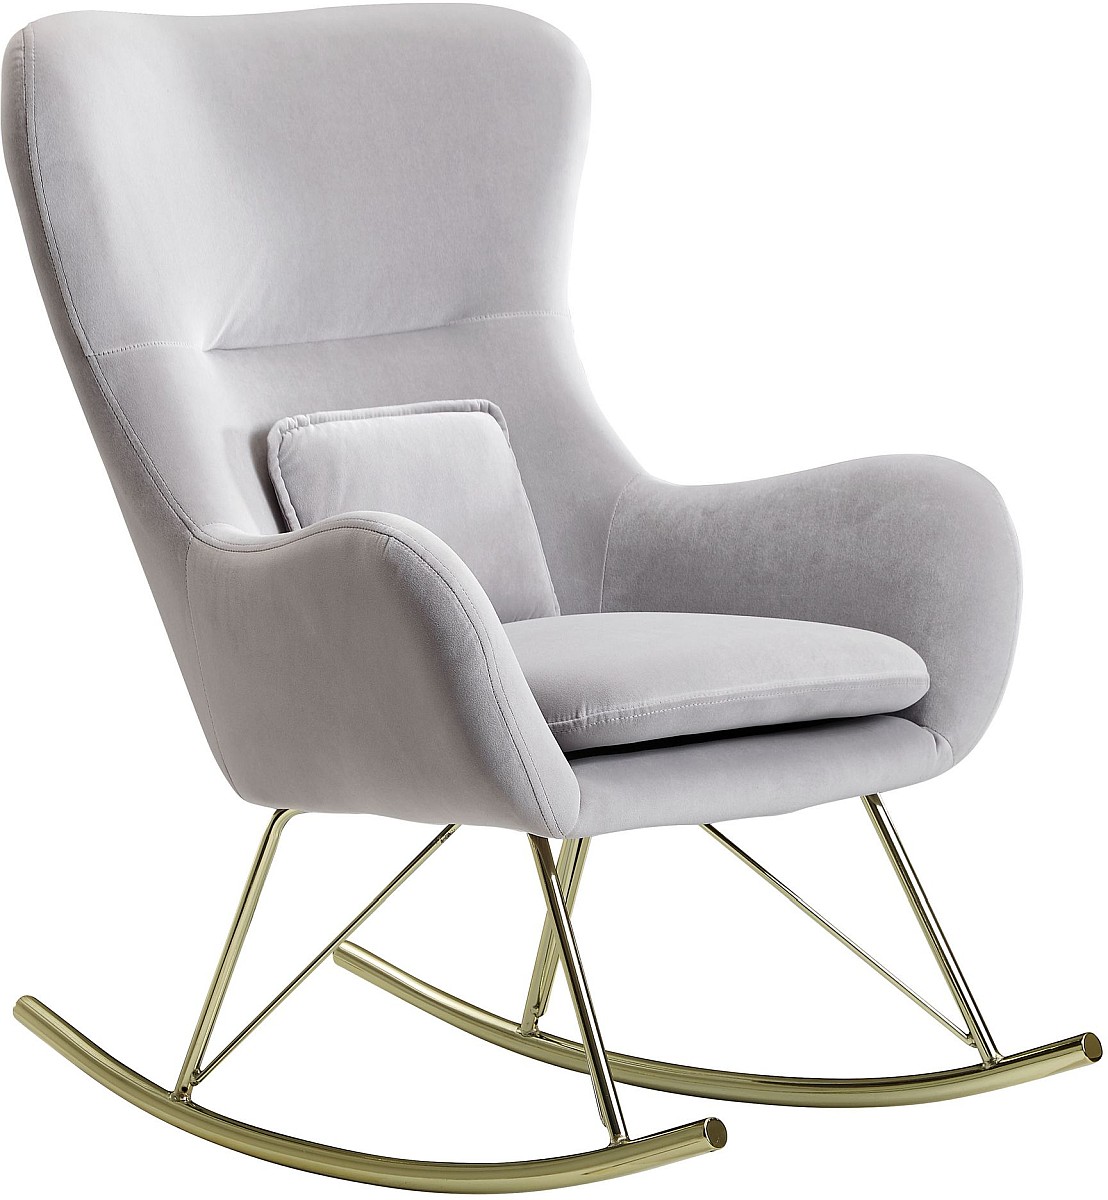 Fauteuil rocking chair WOHNLING